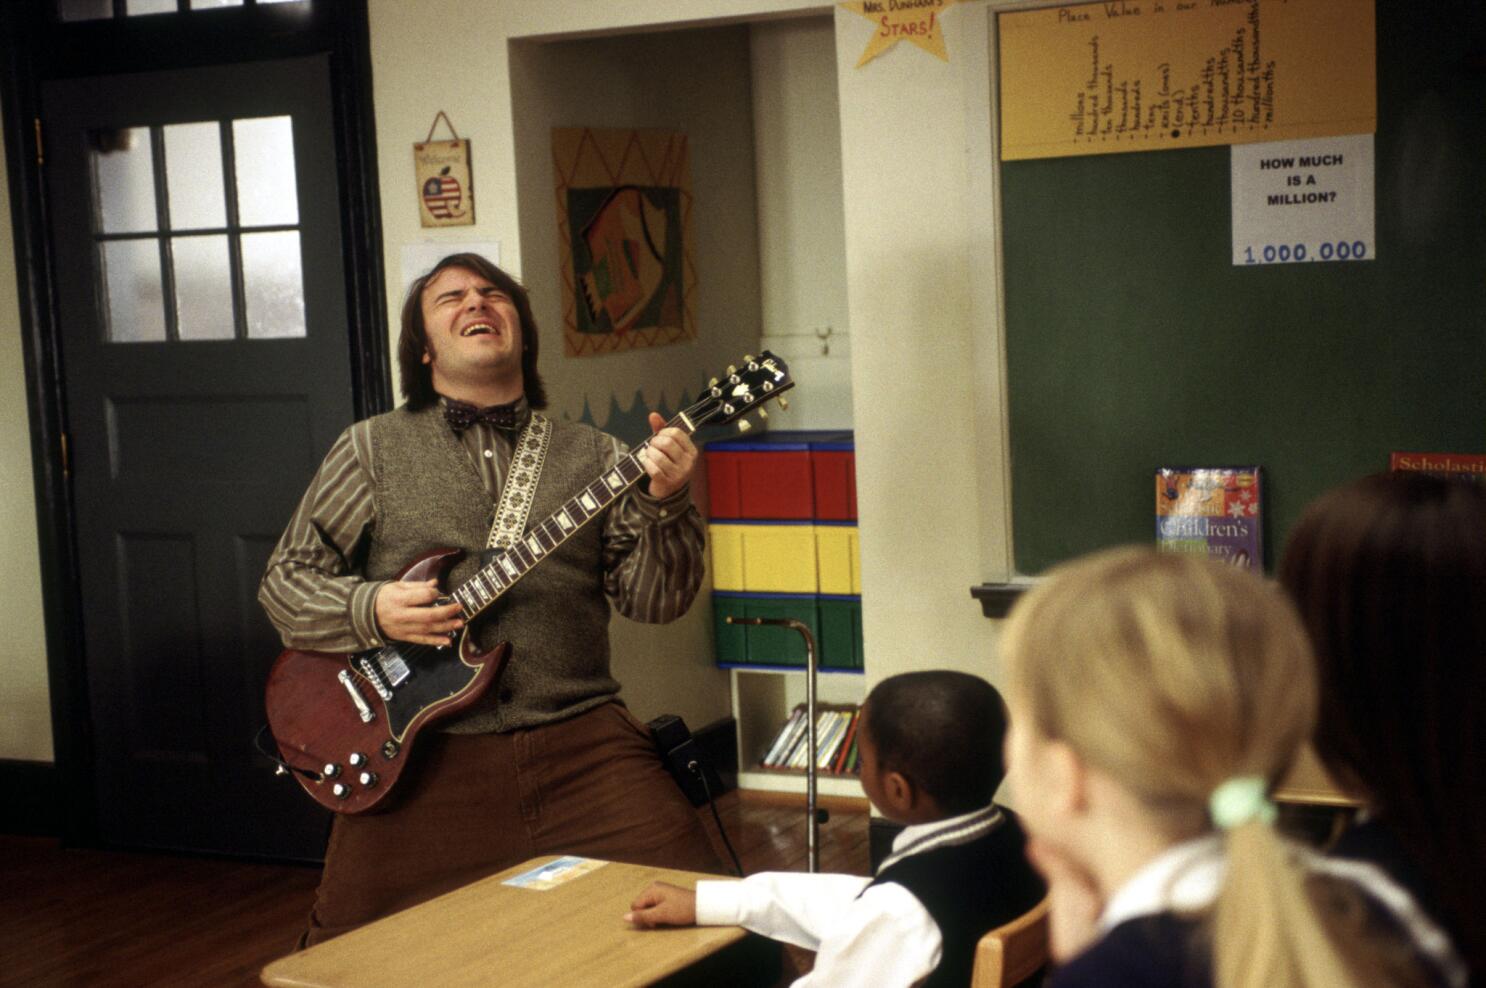 Why this scene from 'School of Rock' went viral on Twitter - Los